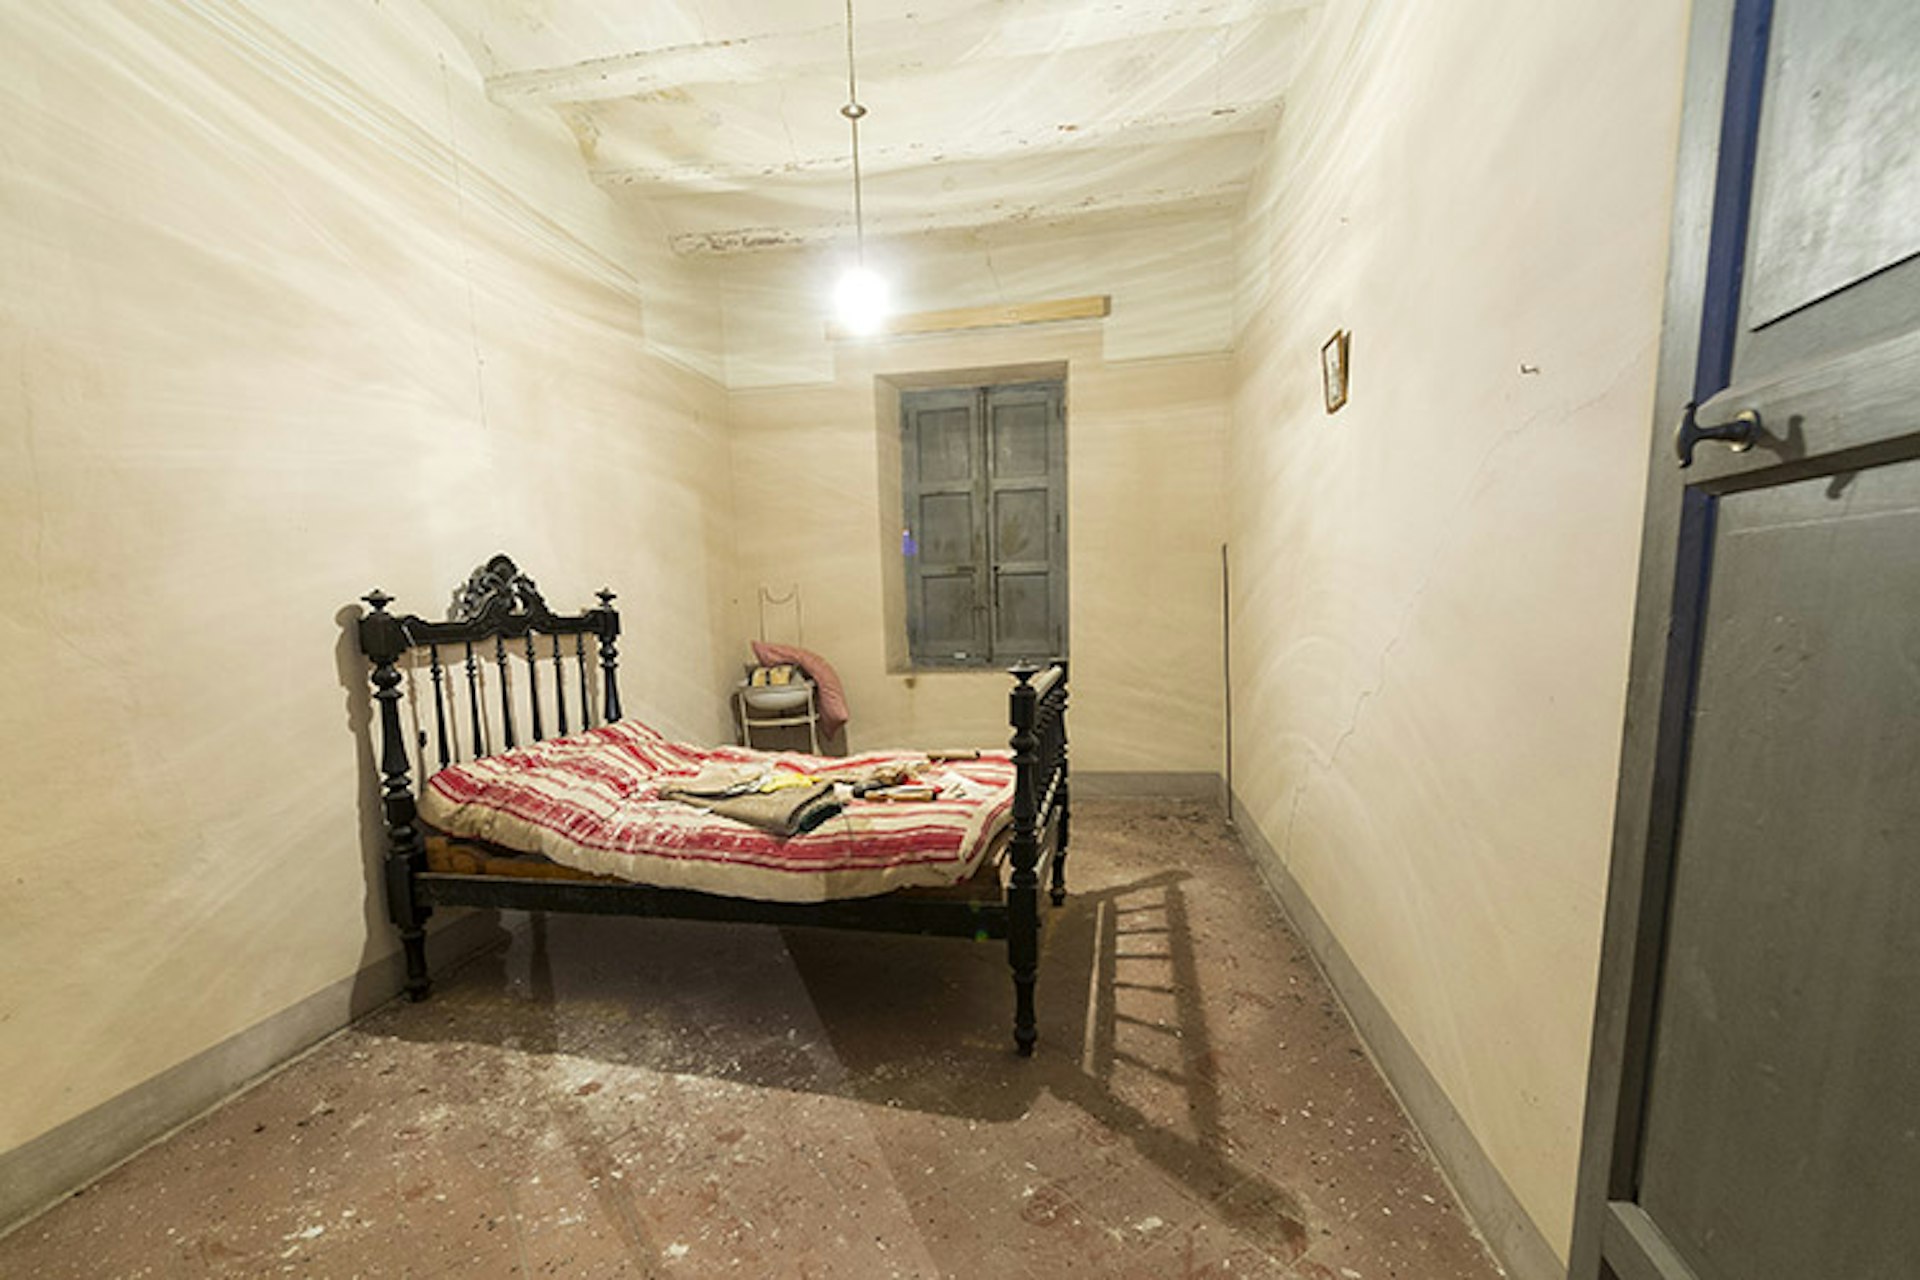 These digs? Not ideal for the first night of a honeymoon. Image by Jose A. Bernat Bacete / Moment Open / Getty Images.